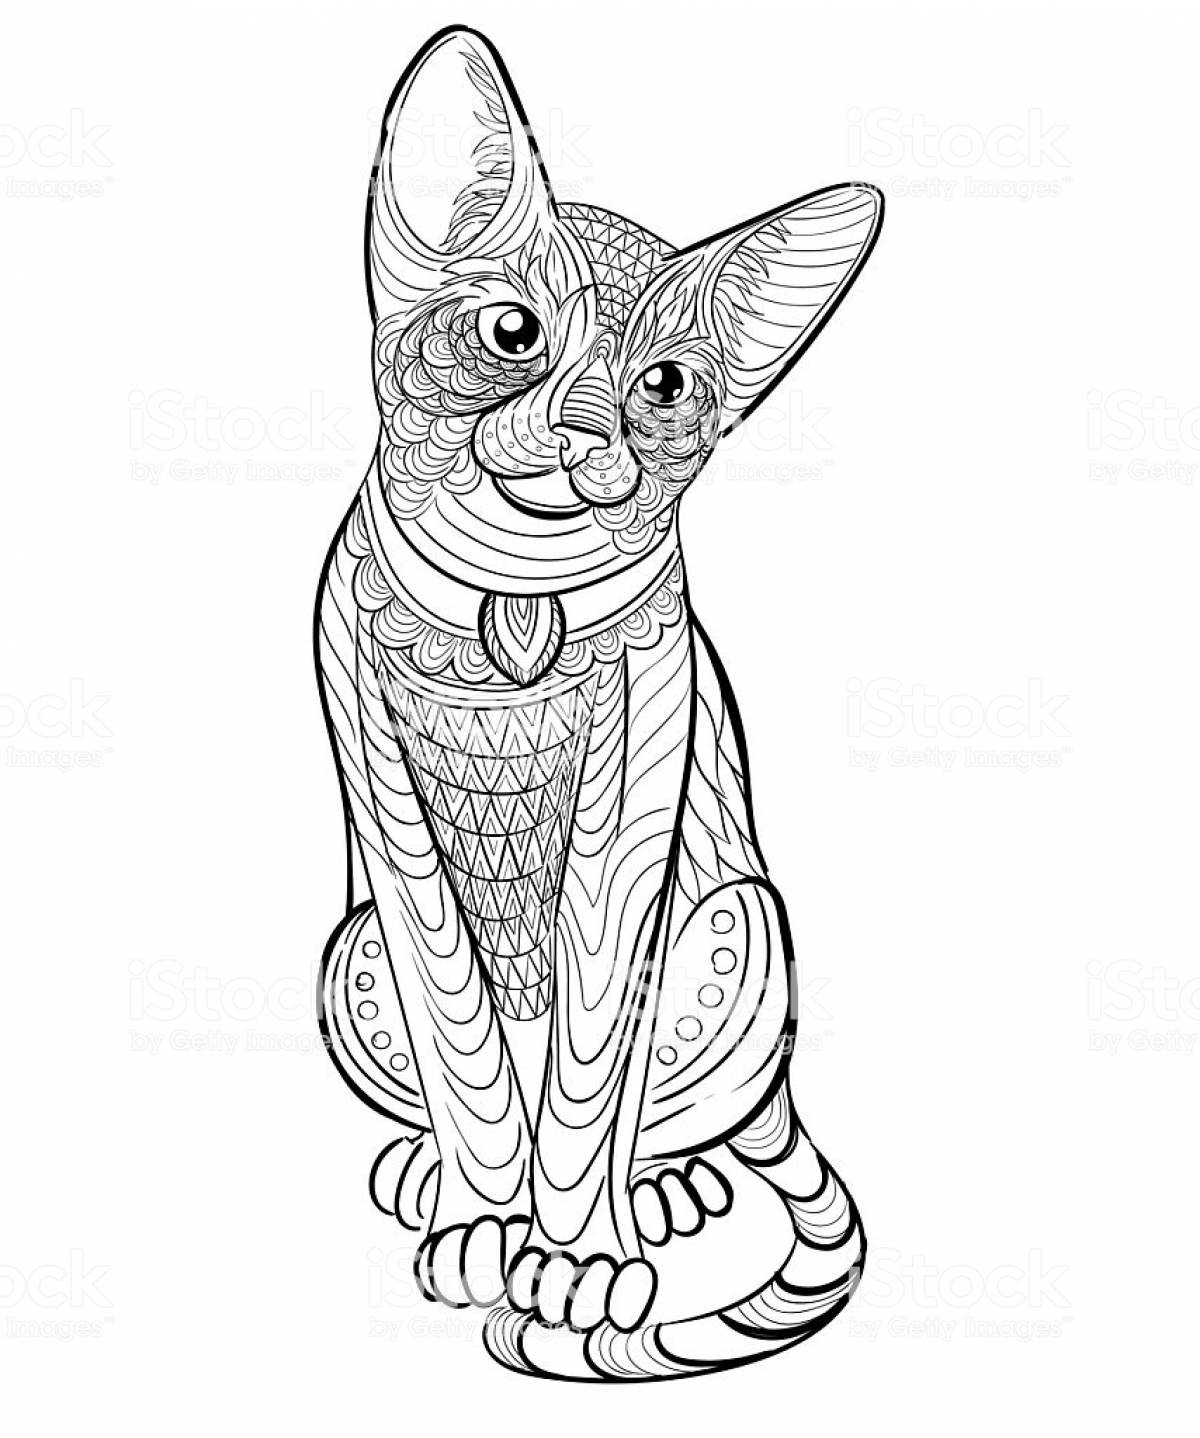 Sphynx antistress coloring page